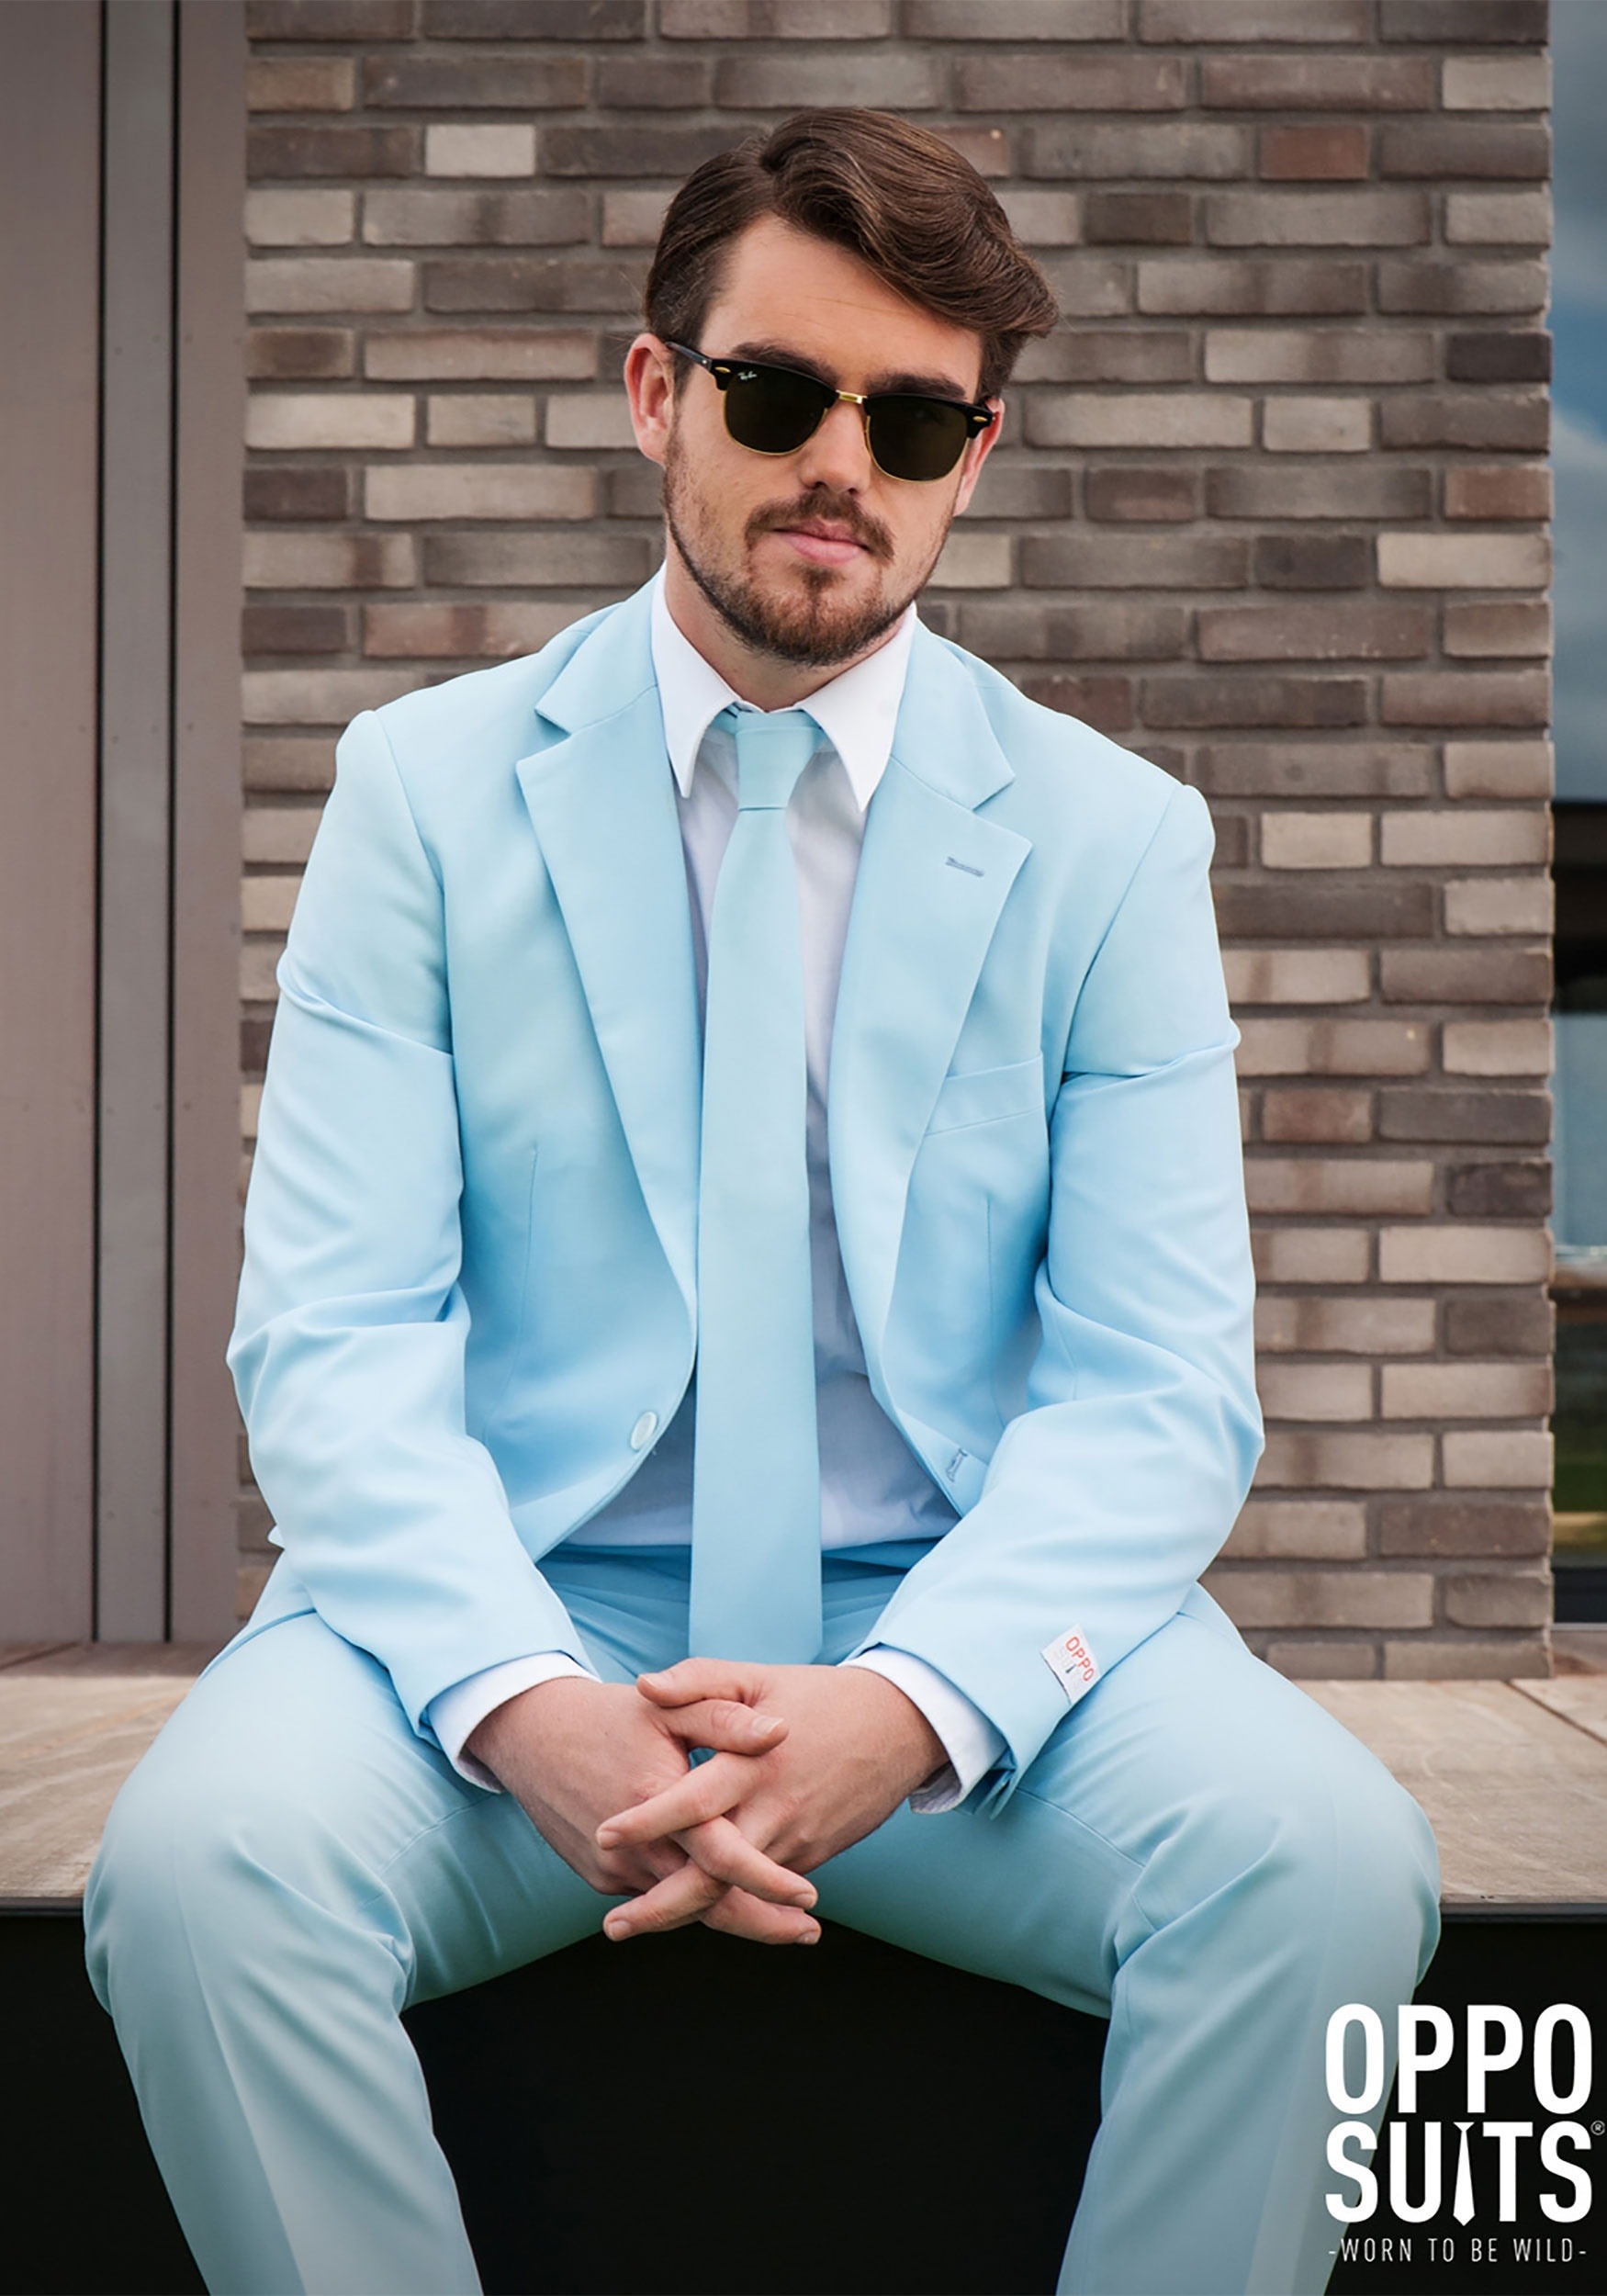 Men's OppoSuits Baby Blue Suit, 57% OFF | tourism.ppao.go.th